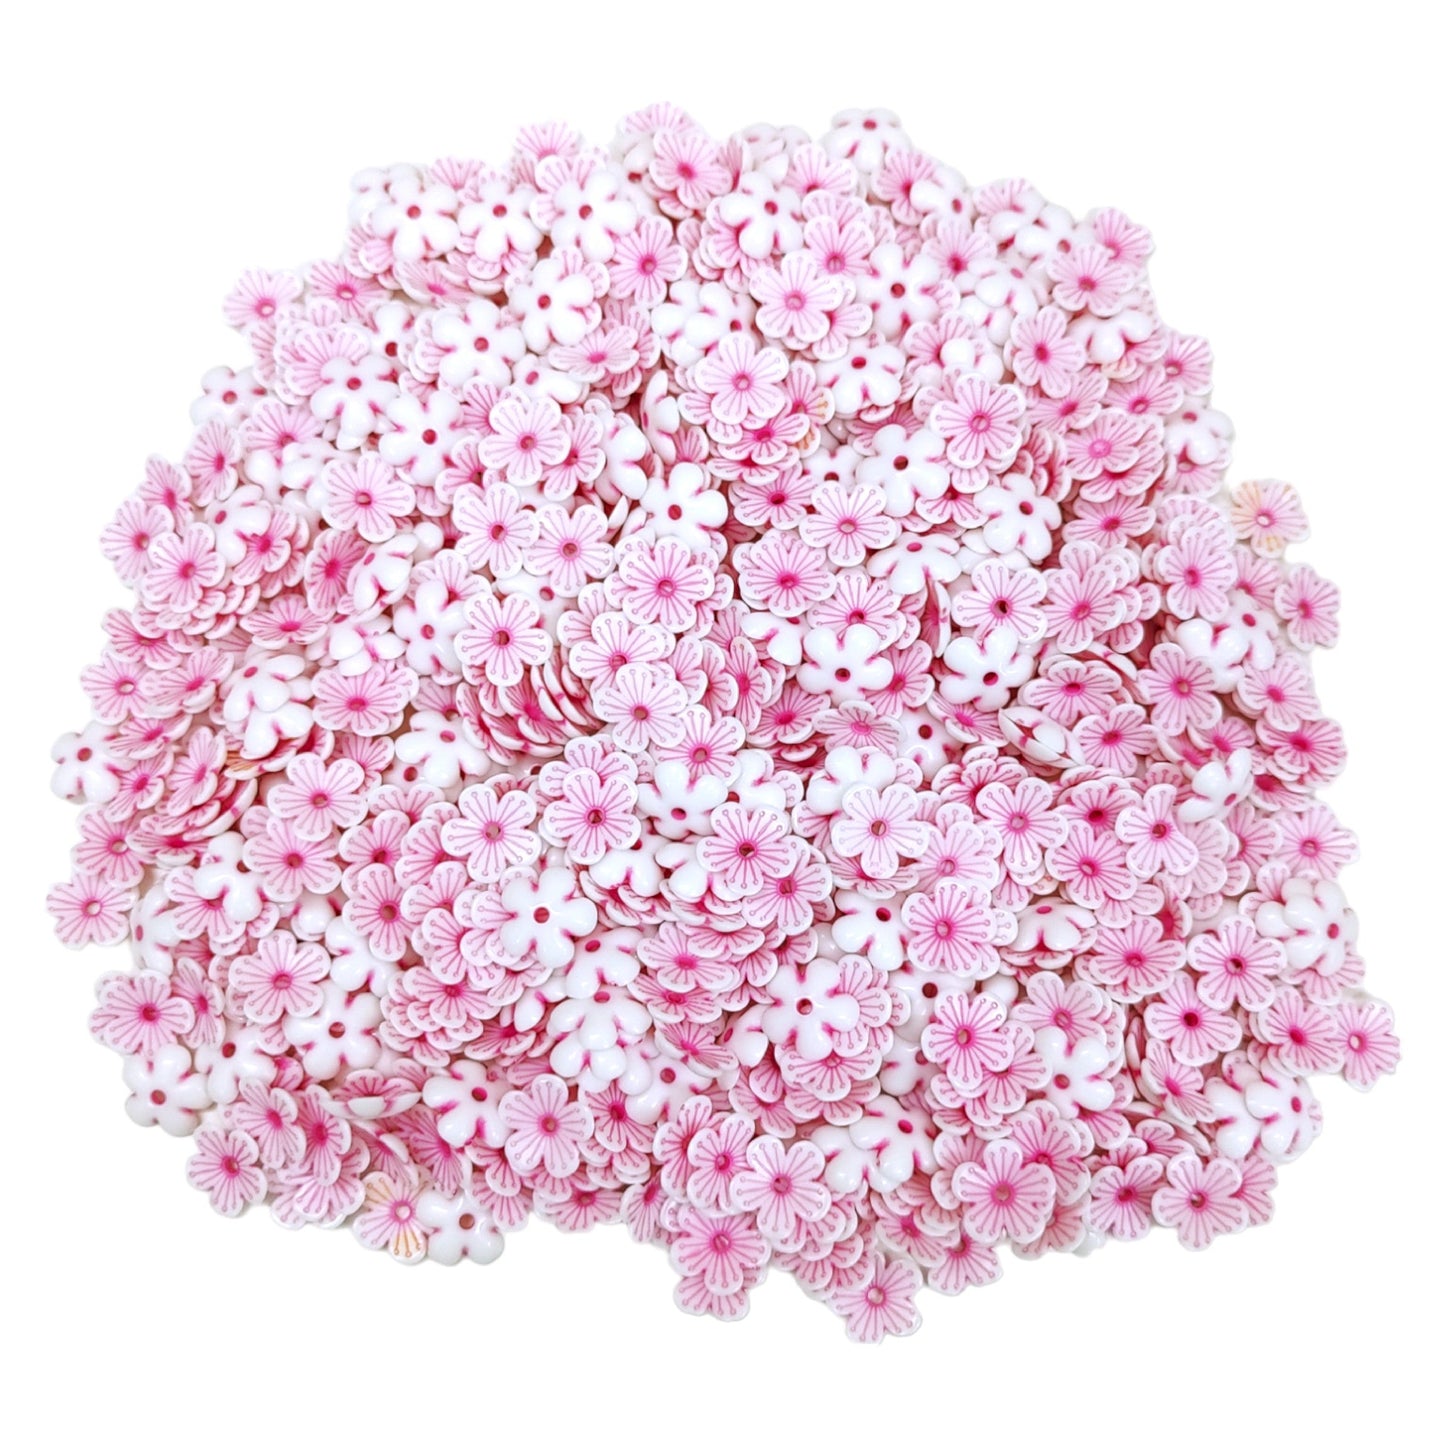 Indian Petals 12mm Small Acrylic Pastel Color Flower For Craft Or Decoration, Pink